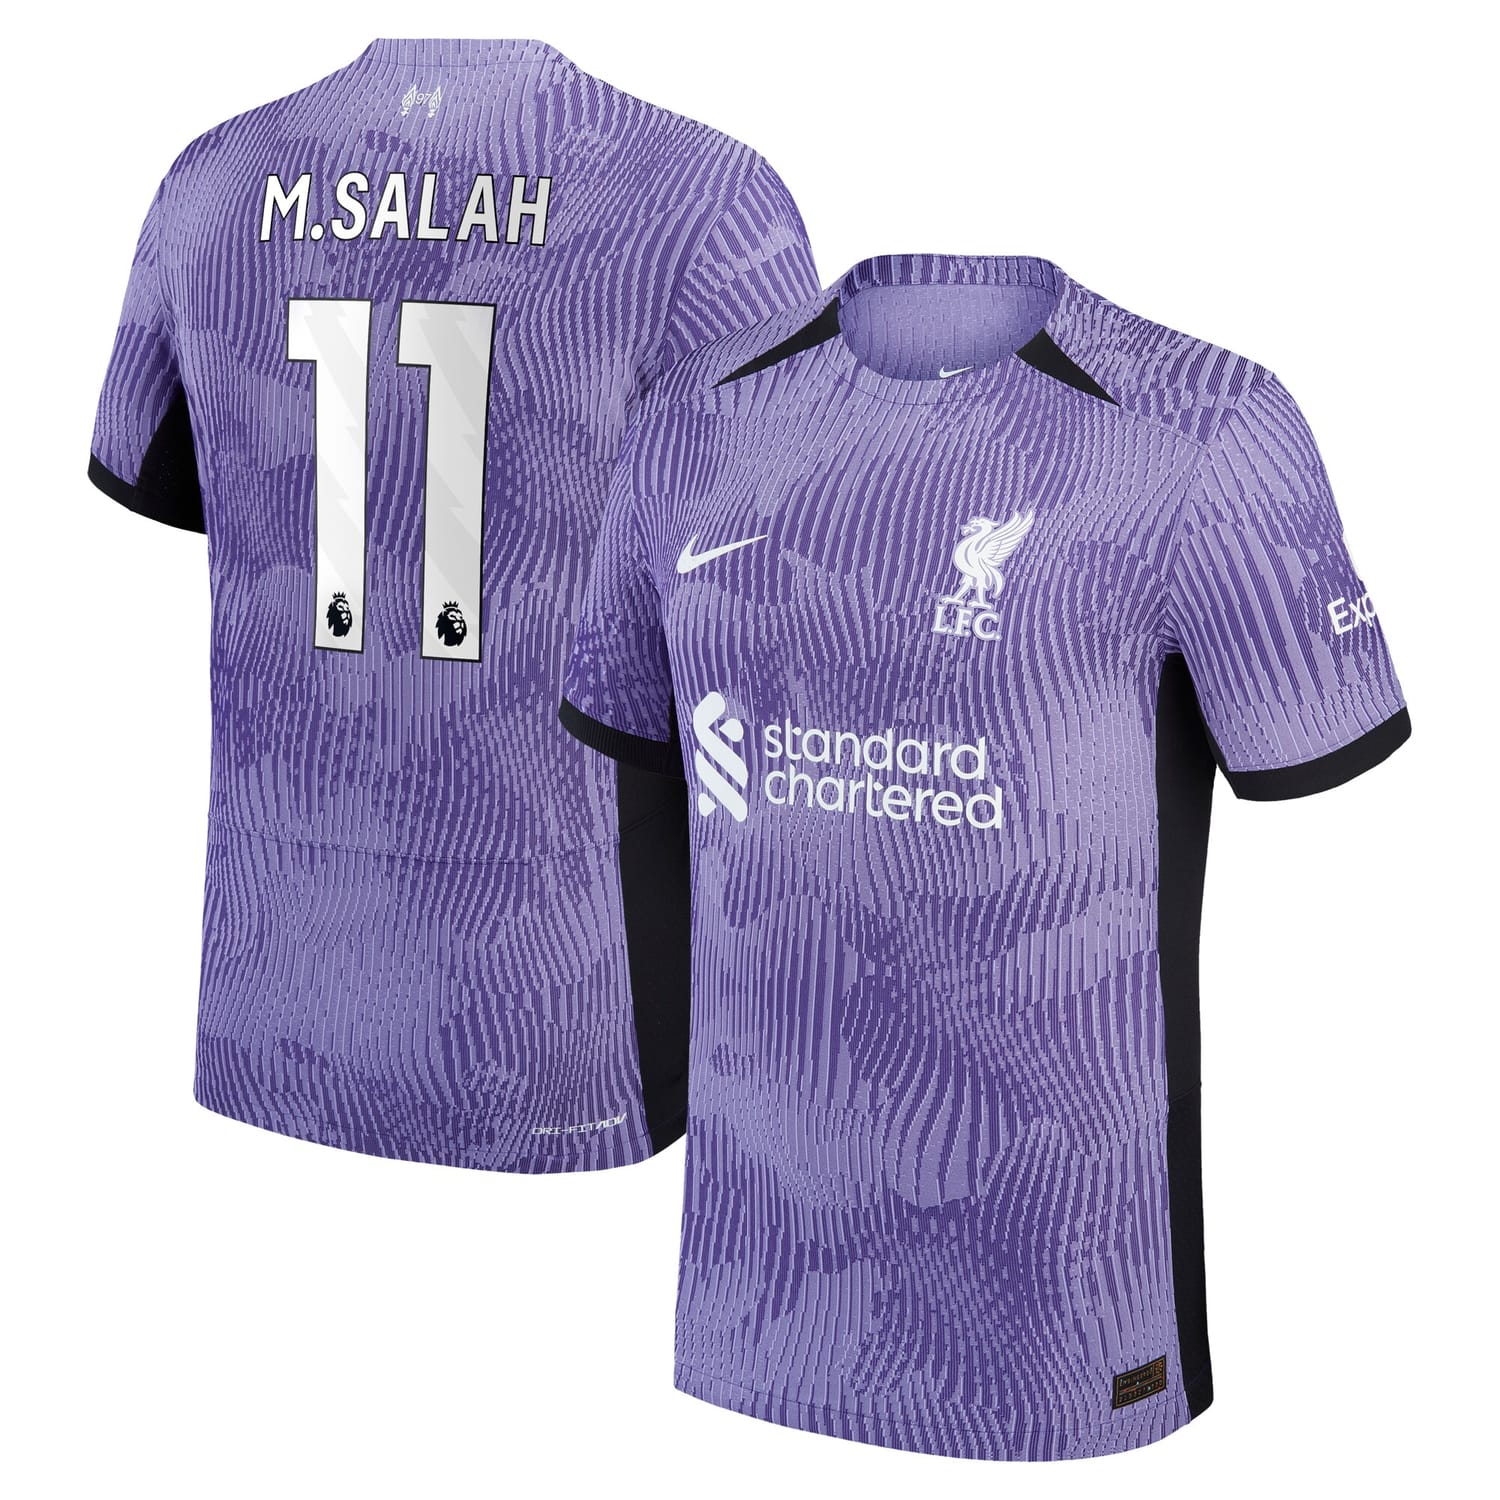 Premier League Liverpool Third Authentic Jersey Shirt 2023-24 player Mohamed Salah 11 printing for Men